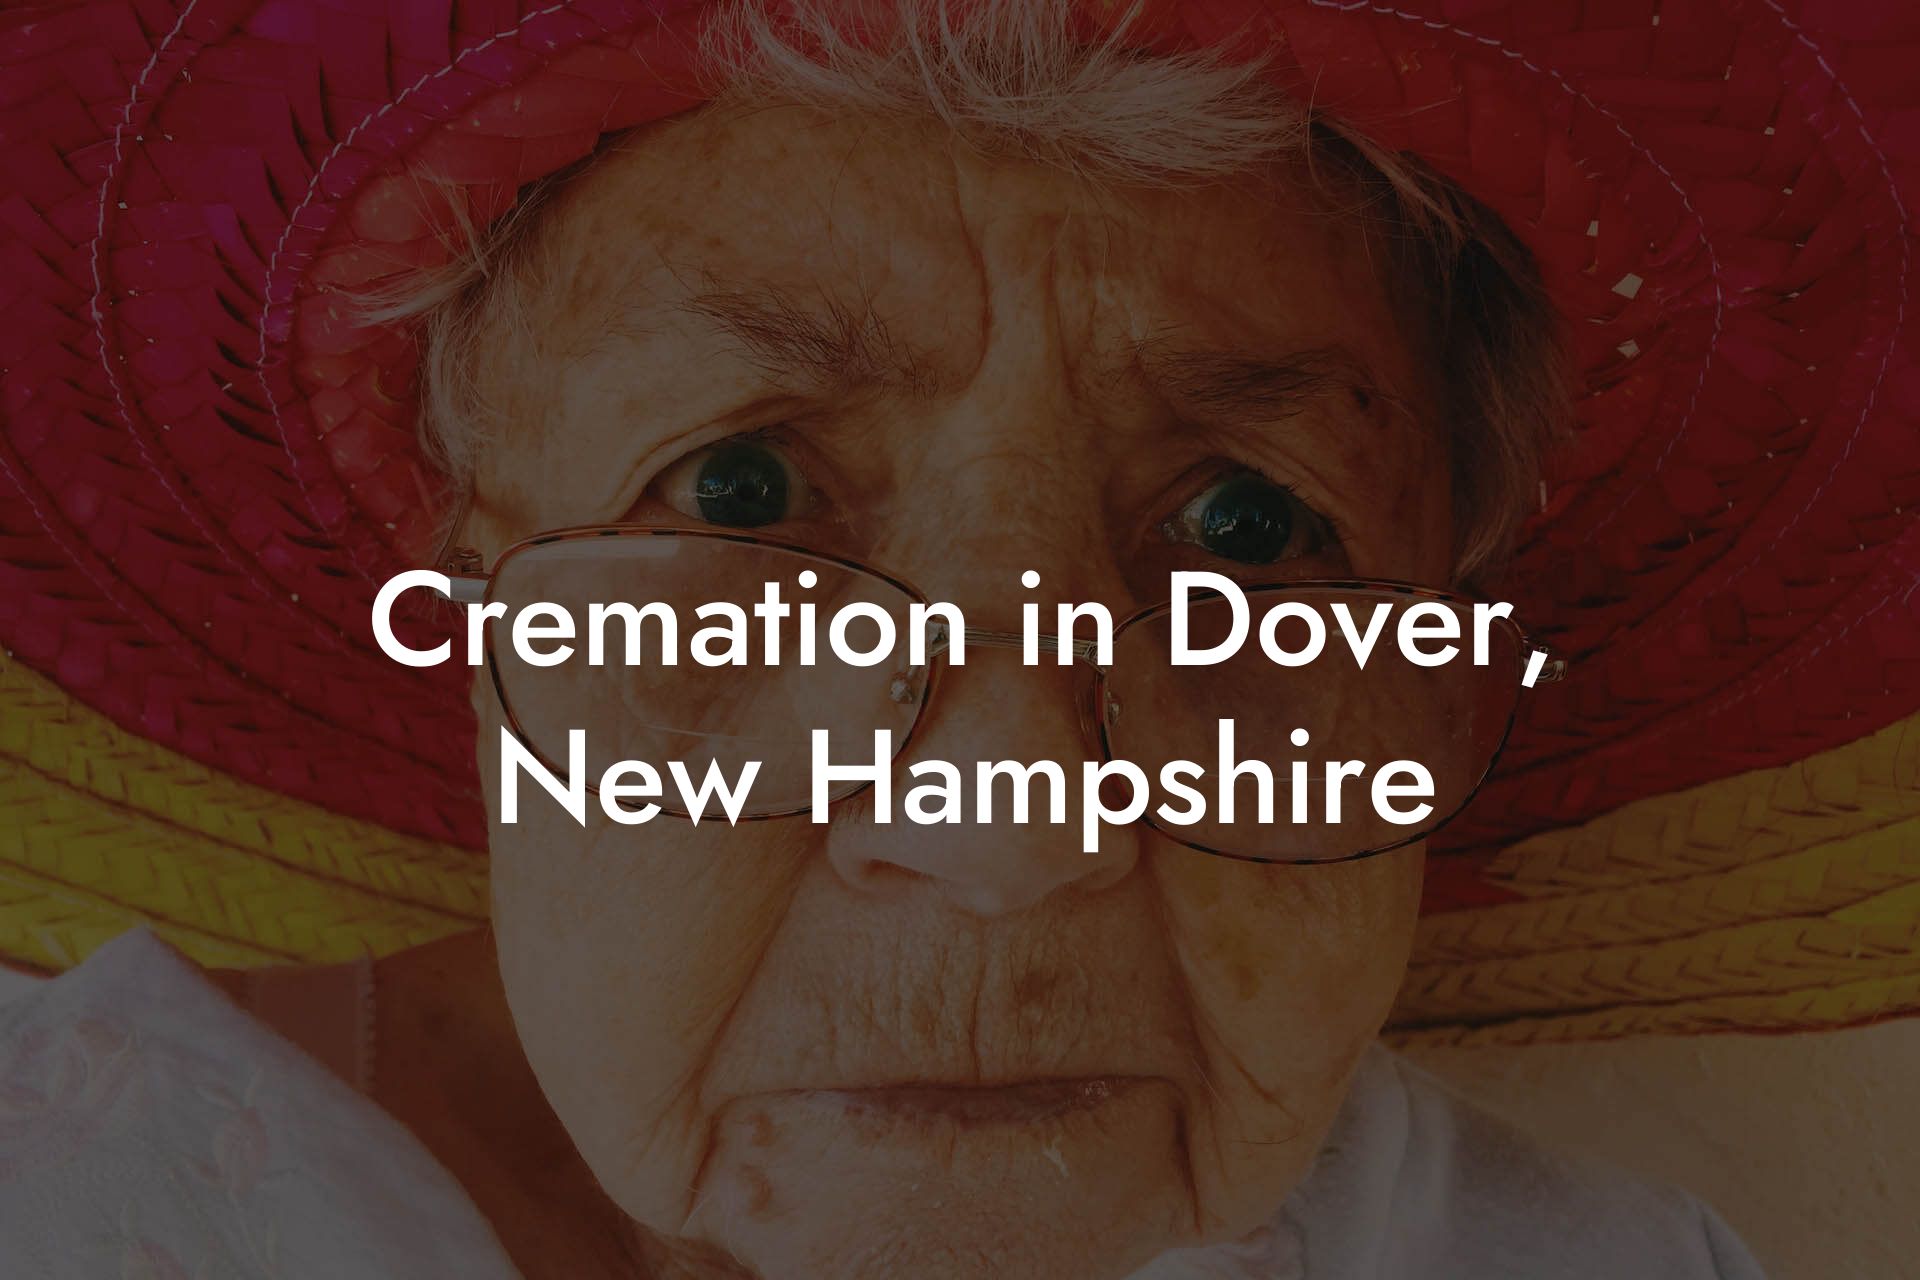 Cremation in Dover, New Hampshire